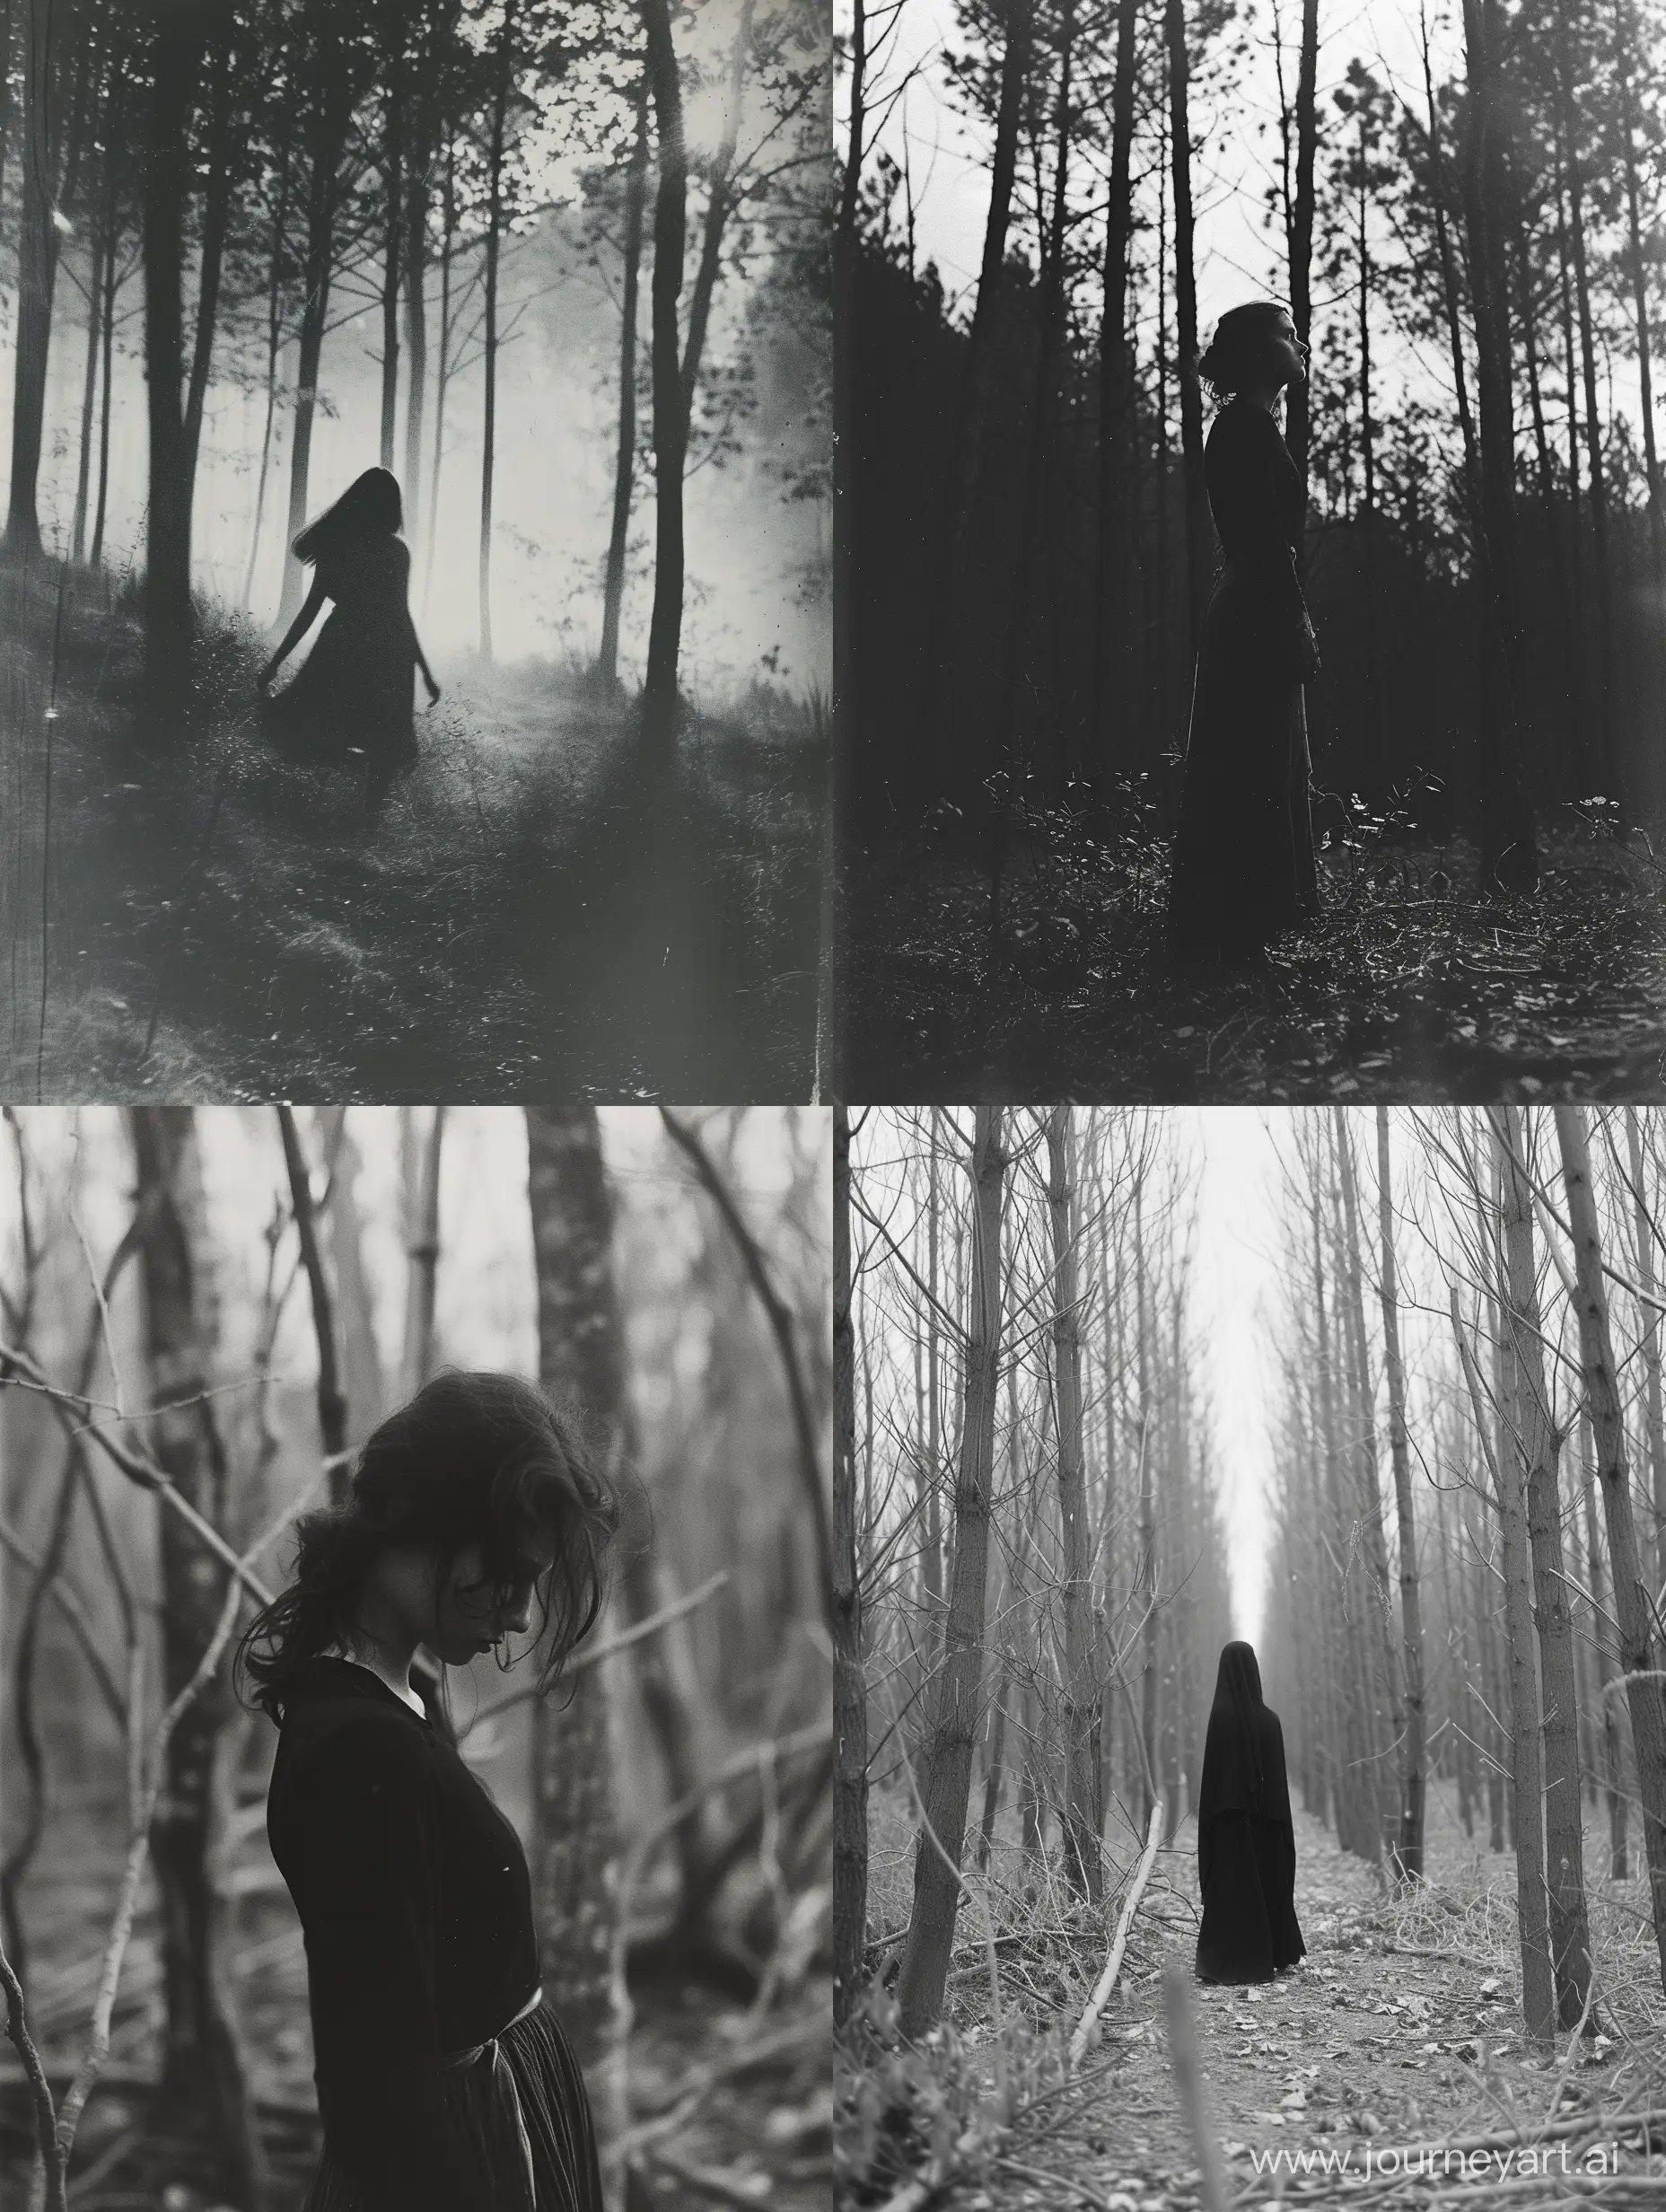 Minimalistic-Forest-Scene-with-Demonic-Enigma-Woman-in-Grayscale